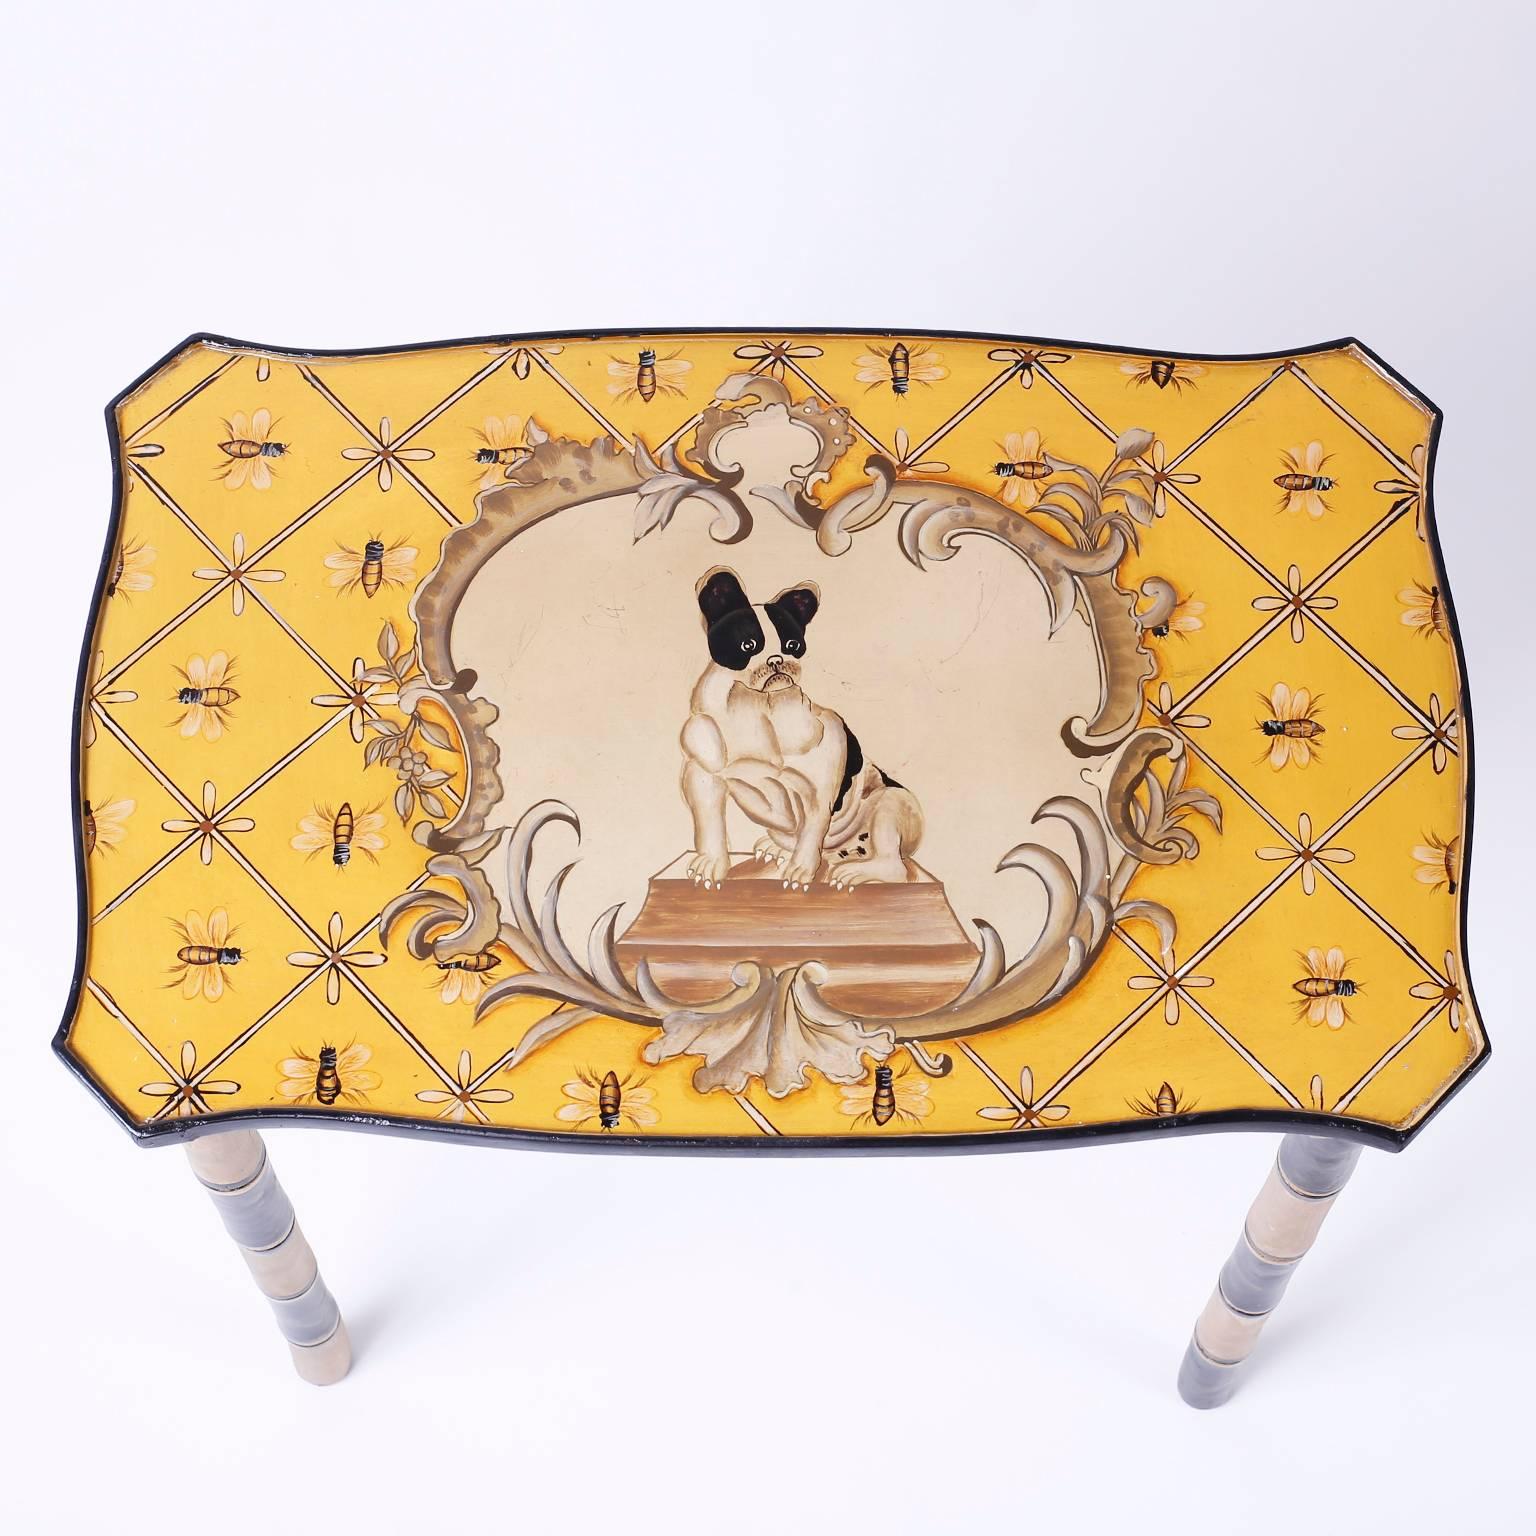 Dog Themed Nesting Tables In Excellent Condition For Sale In Palm Beach, FL